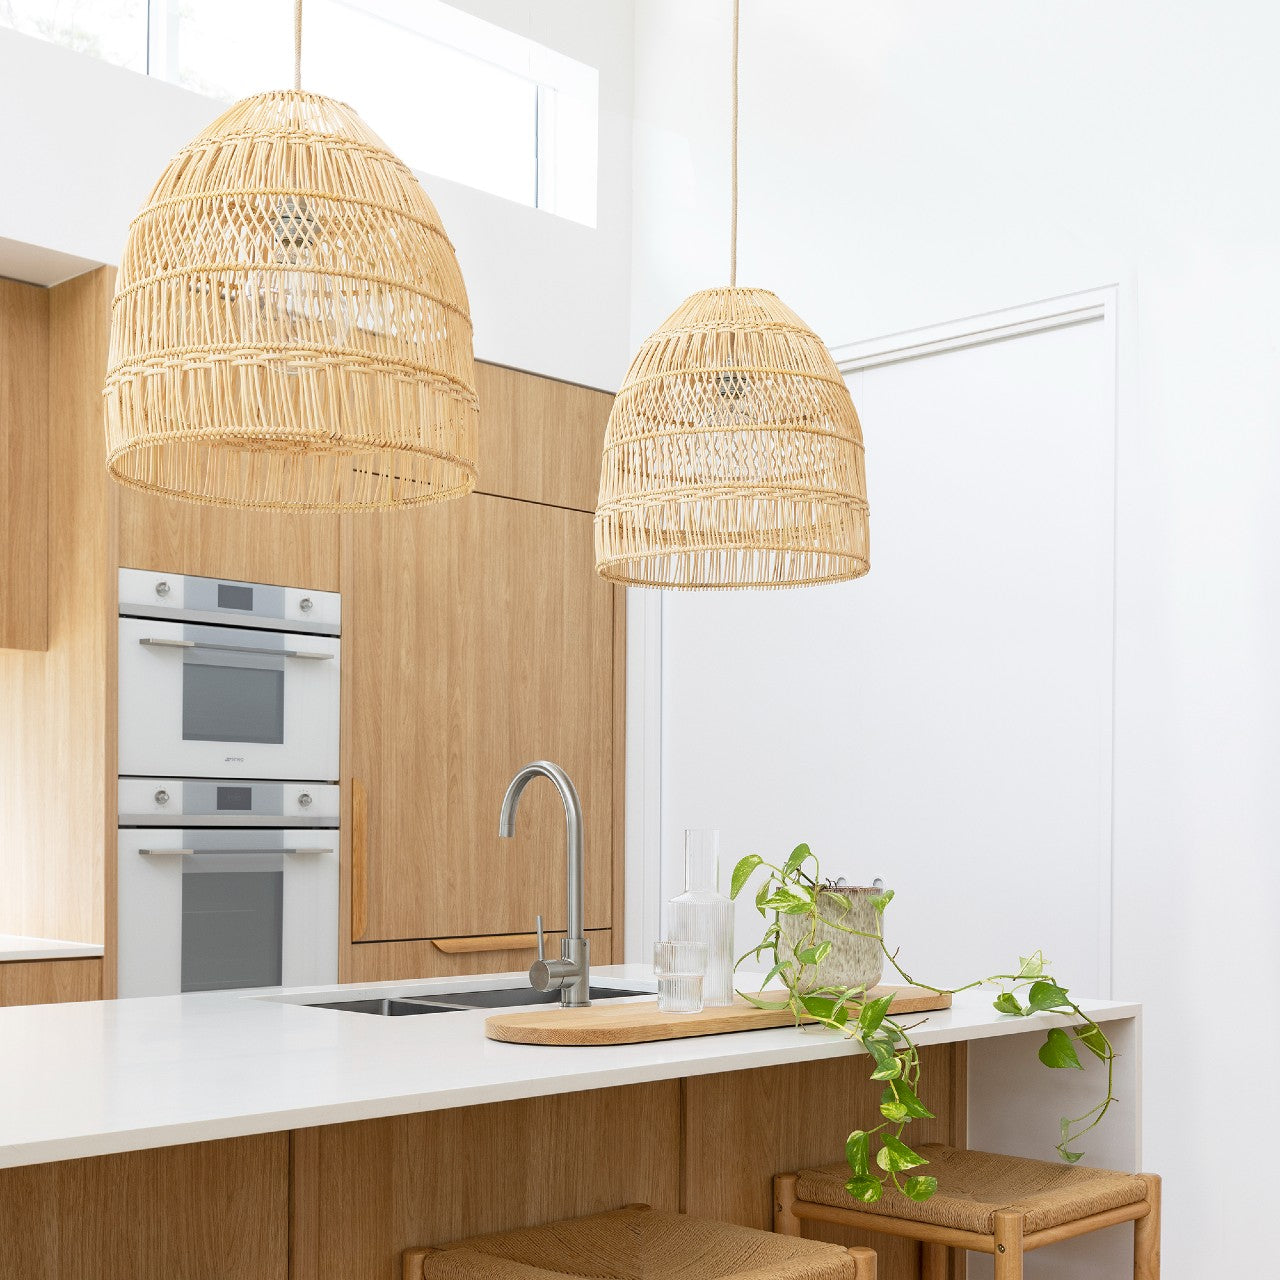 Coastal style pendant lights hanging above a light and bright timber and white kitchen.